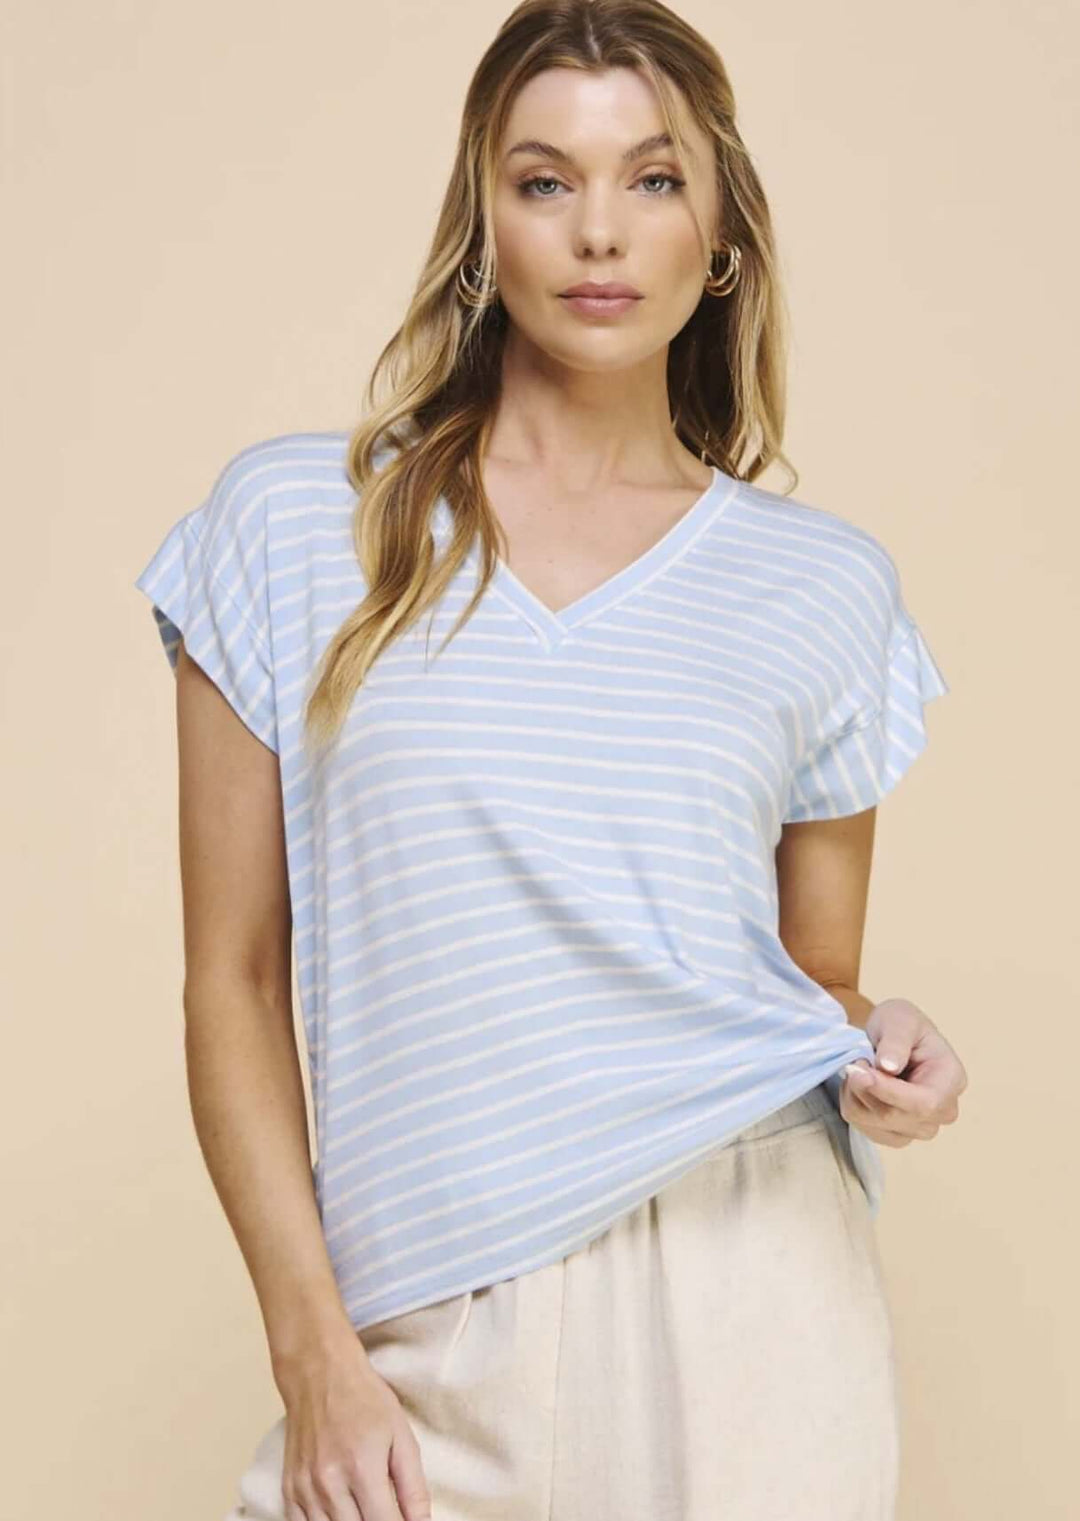 USA Made Women's Super Soft Striped V-Neck Relaxed Fit Tee in Light Blue & White Stripes   | Classy Cozy Cool Made in America Clothing Boutique